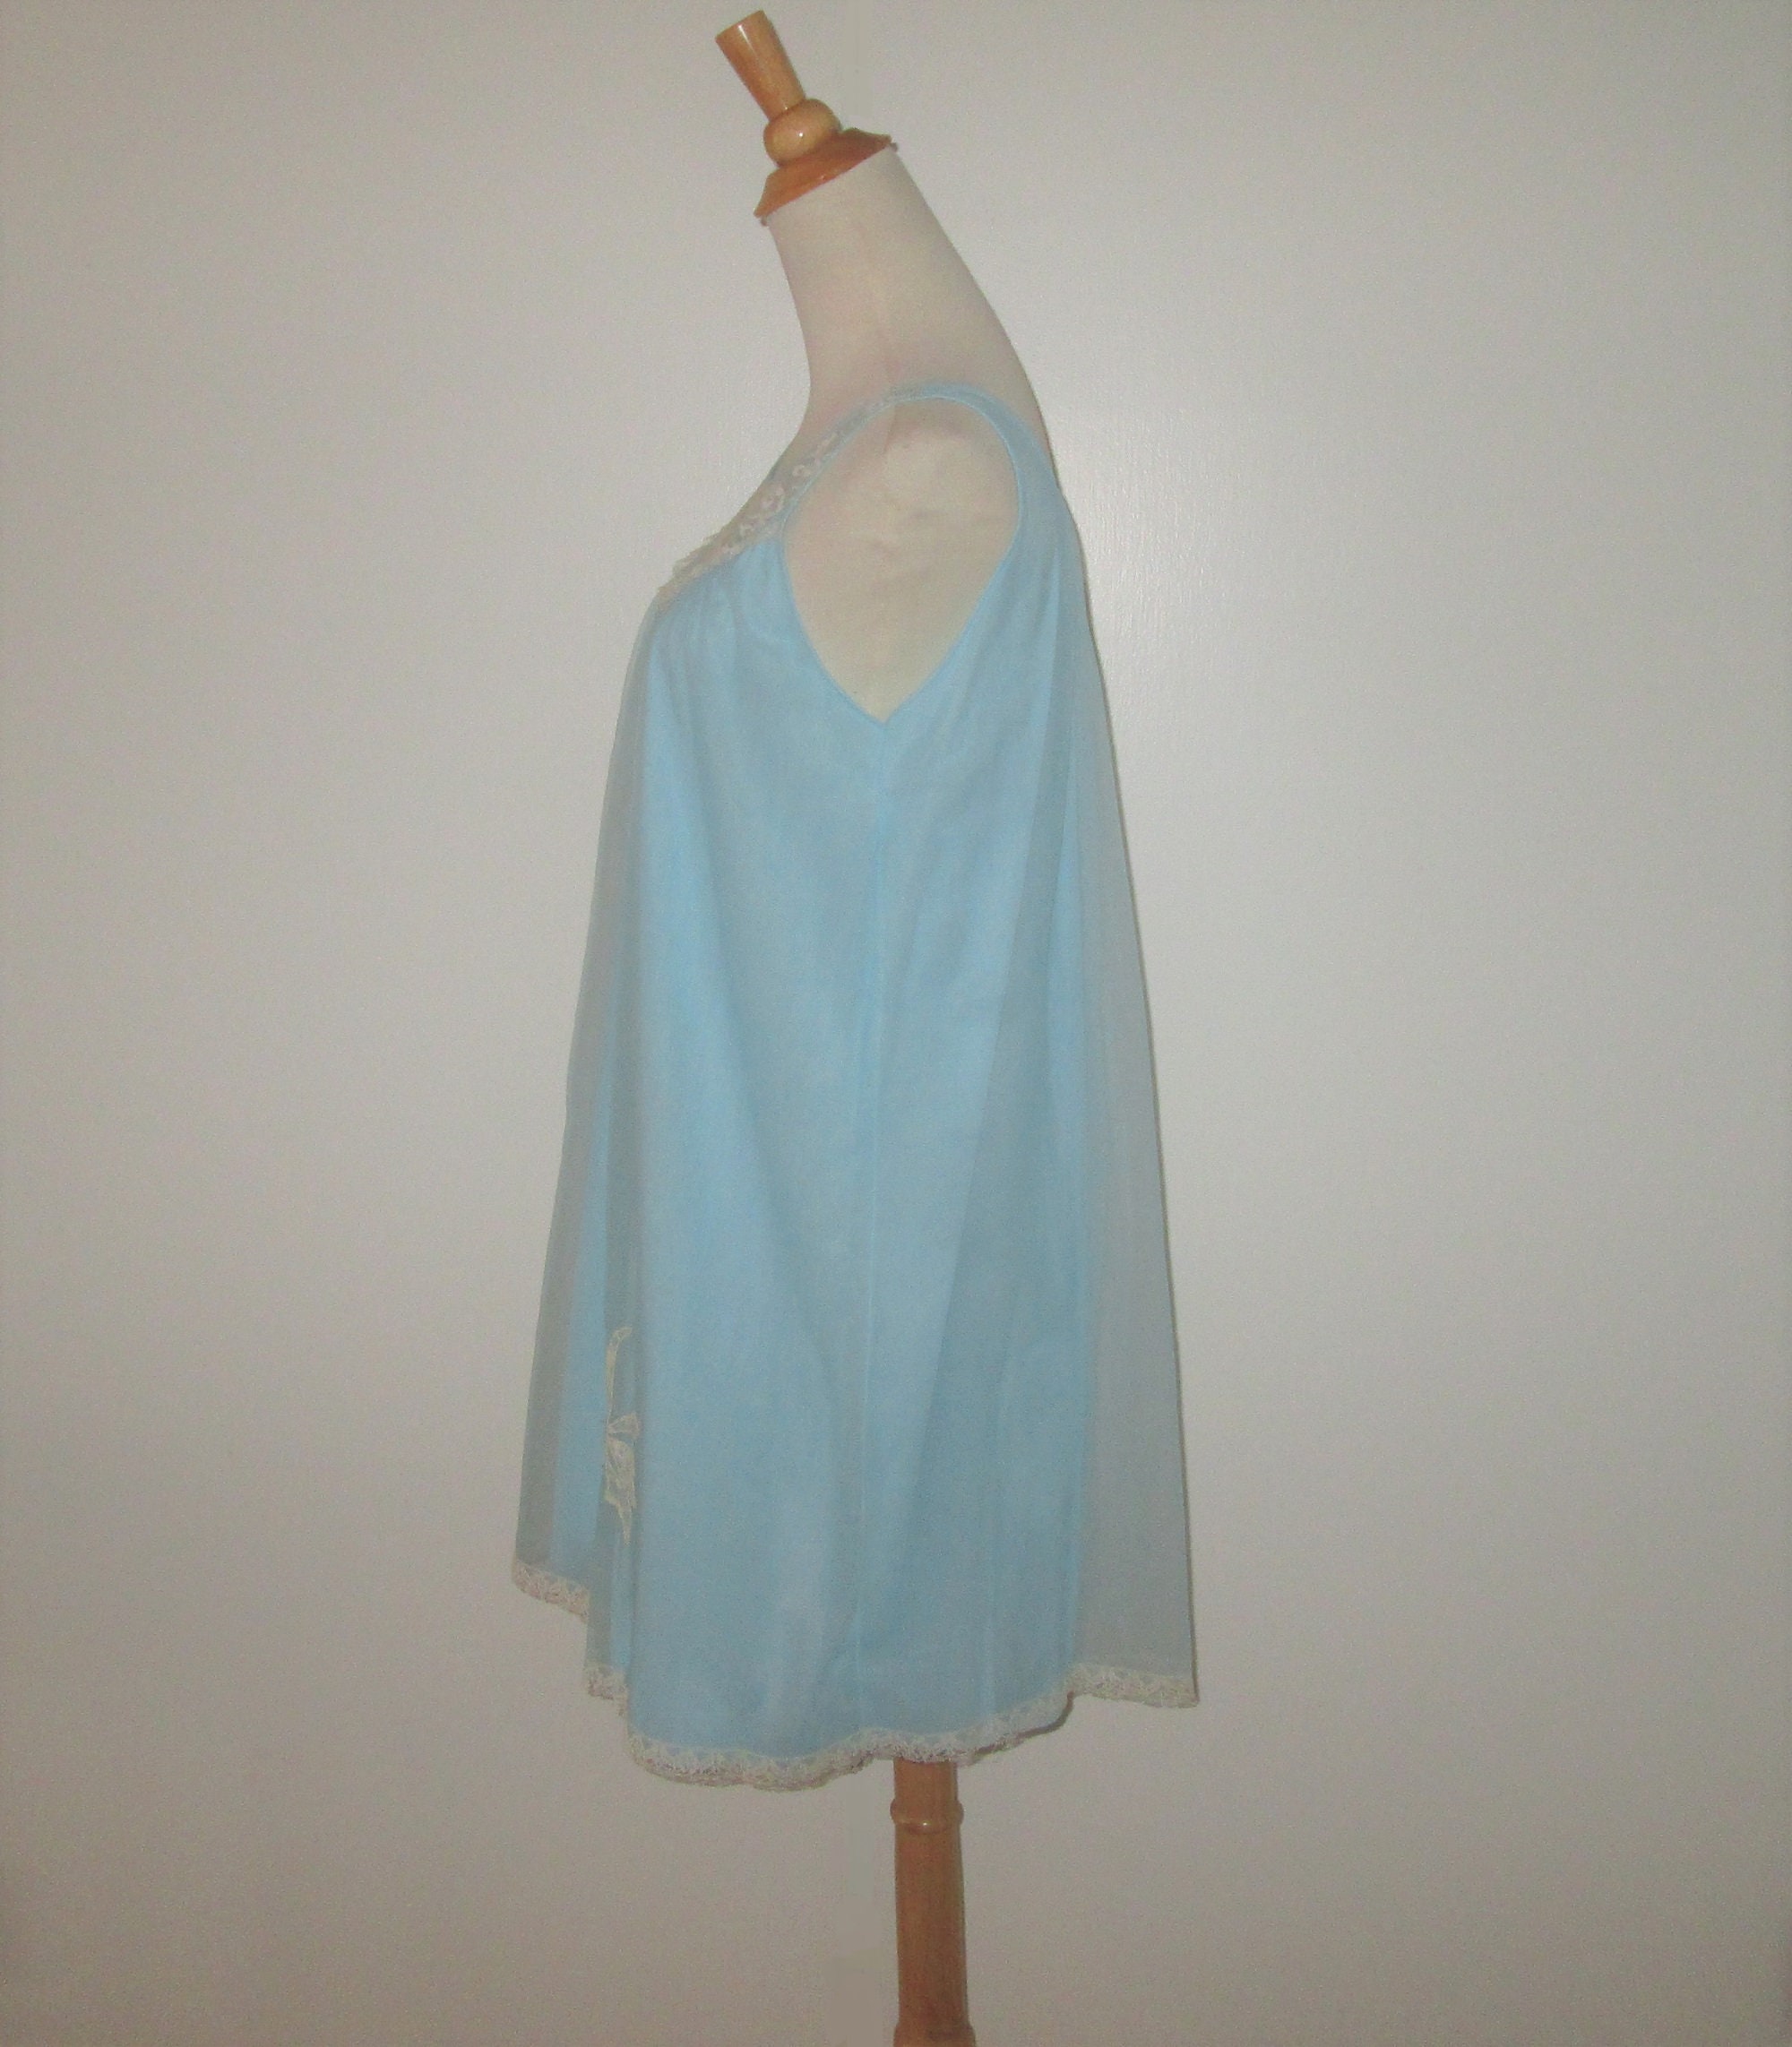 Vintage 1960s Blue Floral Applique Nightgown by Movie Star - Etsy